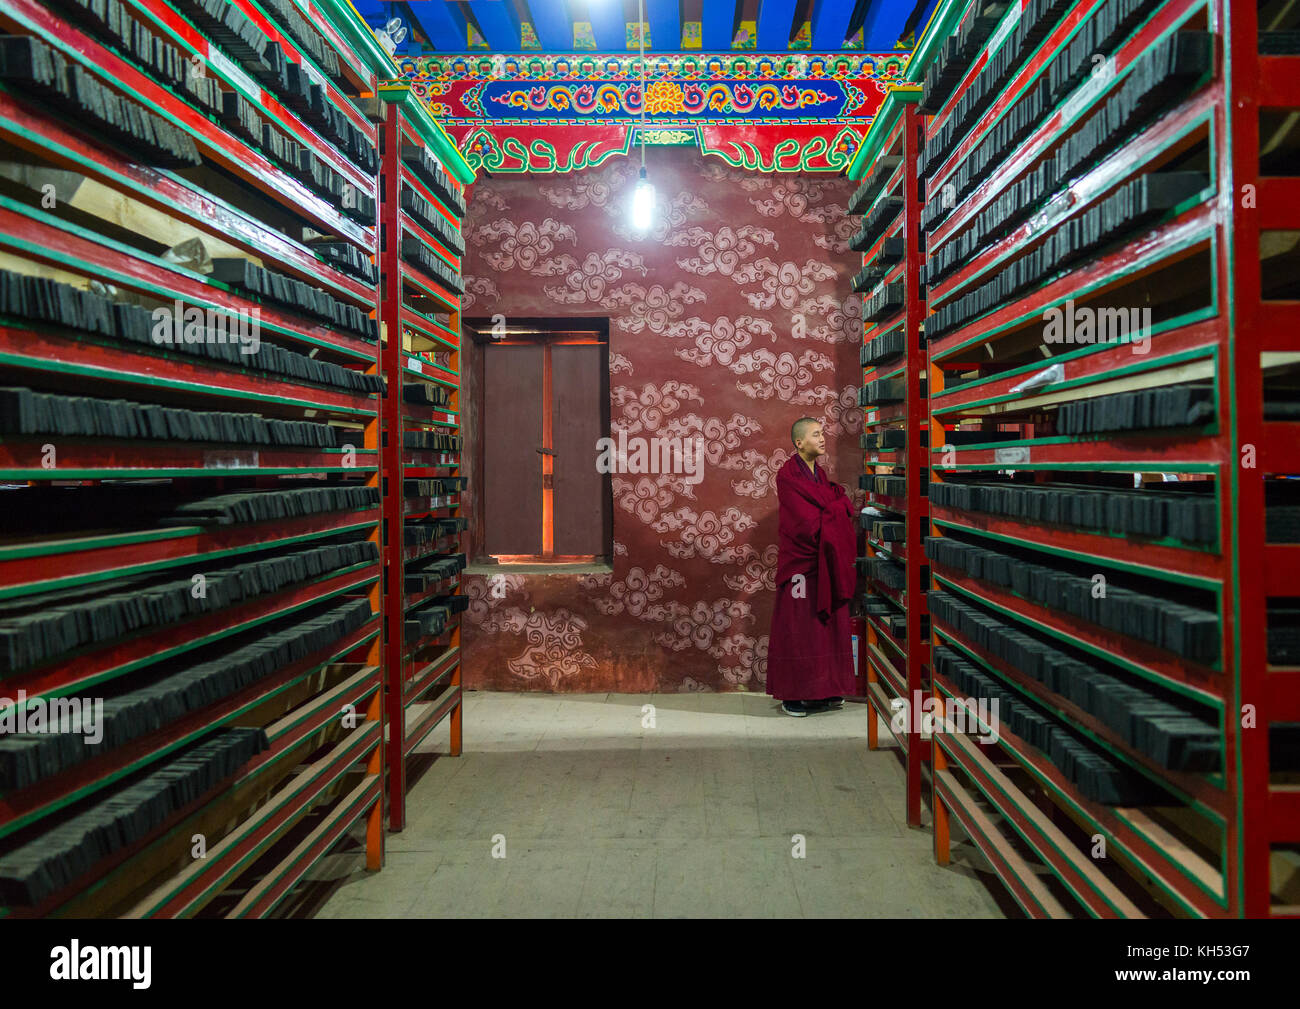 Tibetan scriptures printed from wooden blocks in Barkhang library, Gansu province, Labrang, China Stock Photo